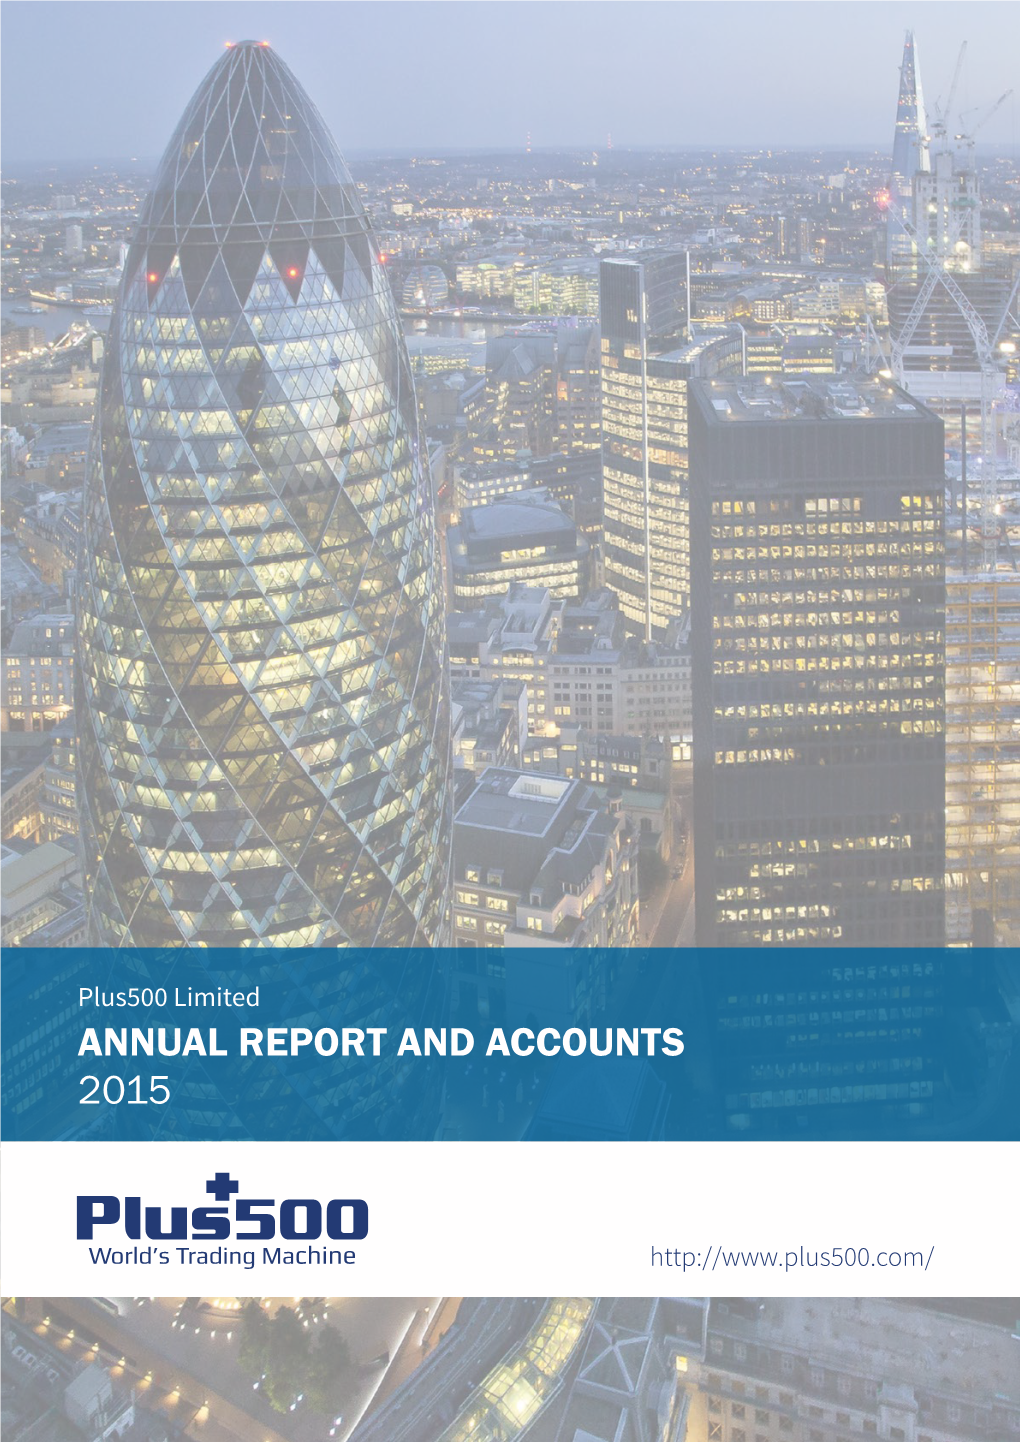 Annual Report and Accounts 2015